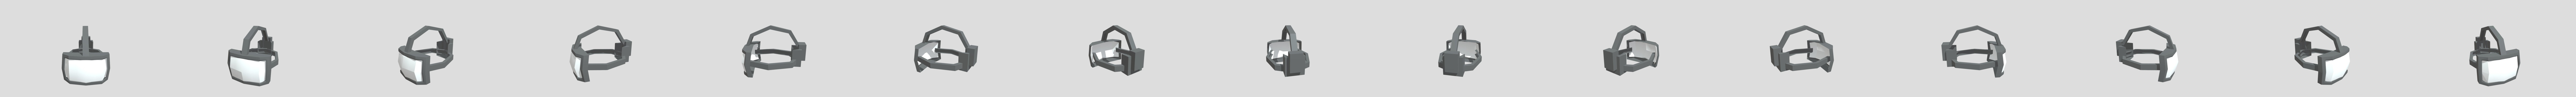 Canvas Holder free VR / AR / low-poly 3D model